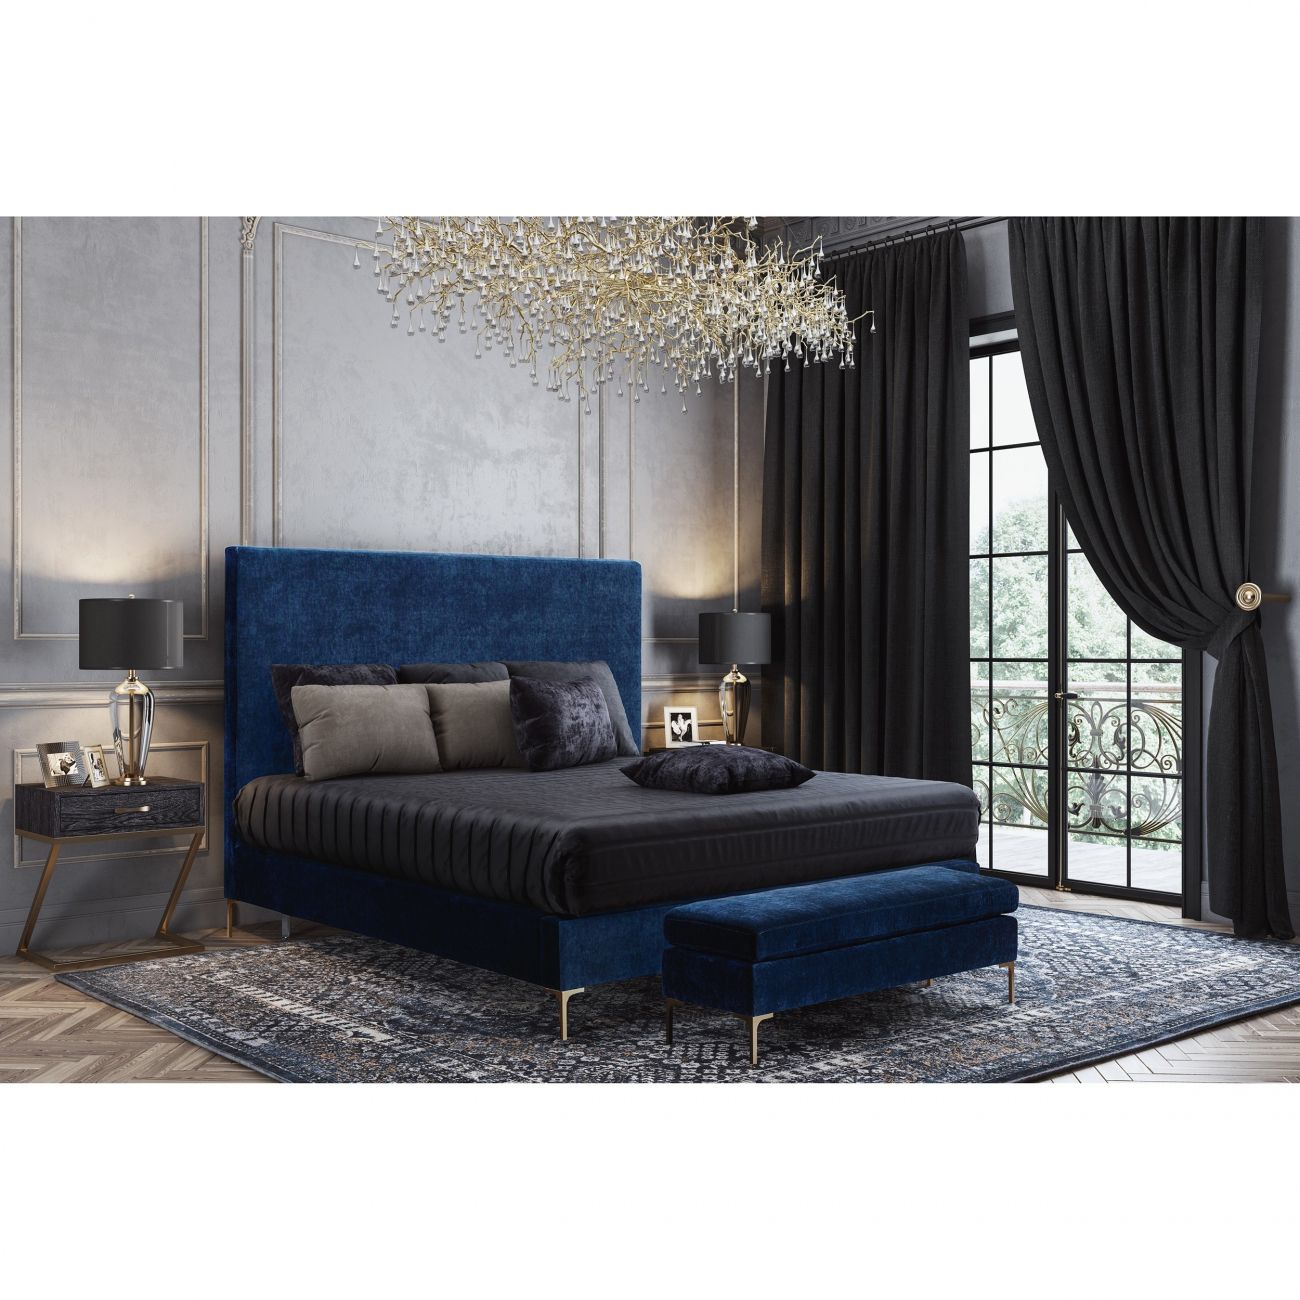 Double bed 160x200 cm blue Mark